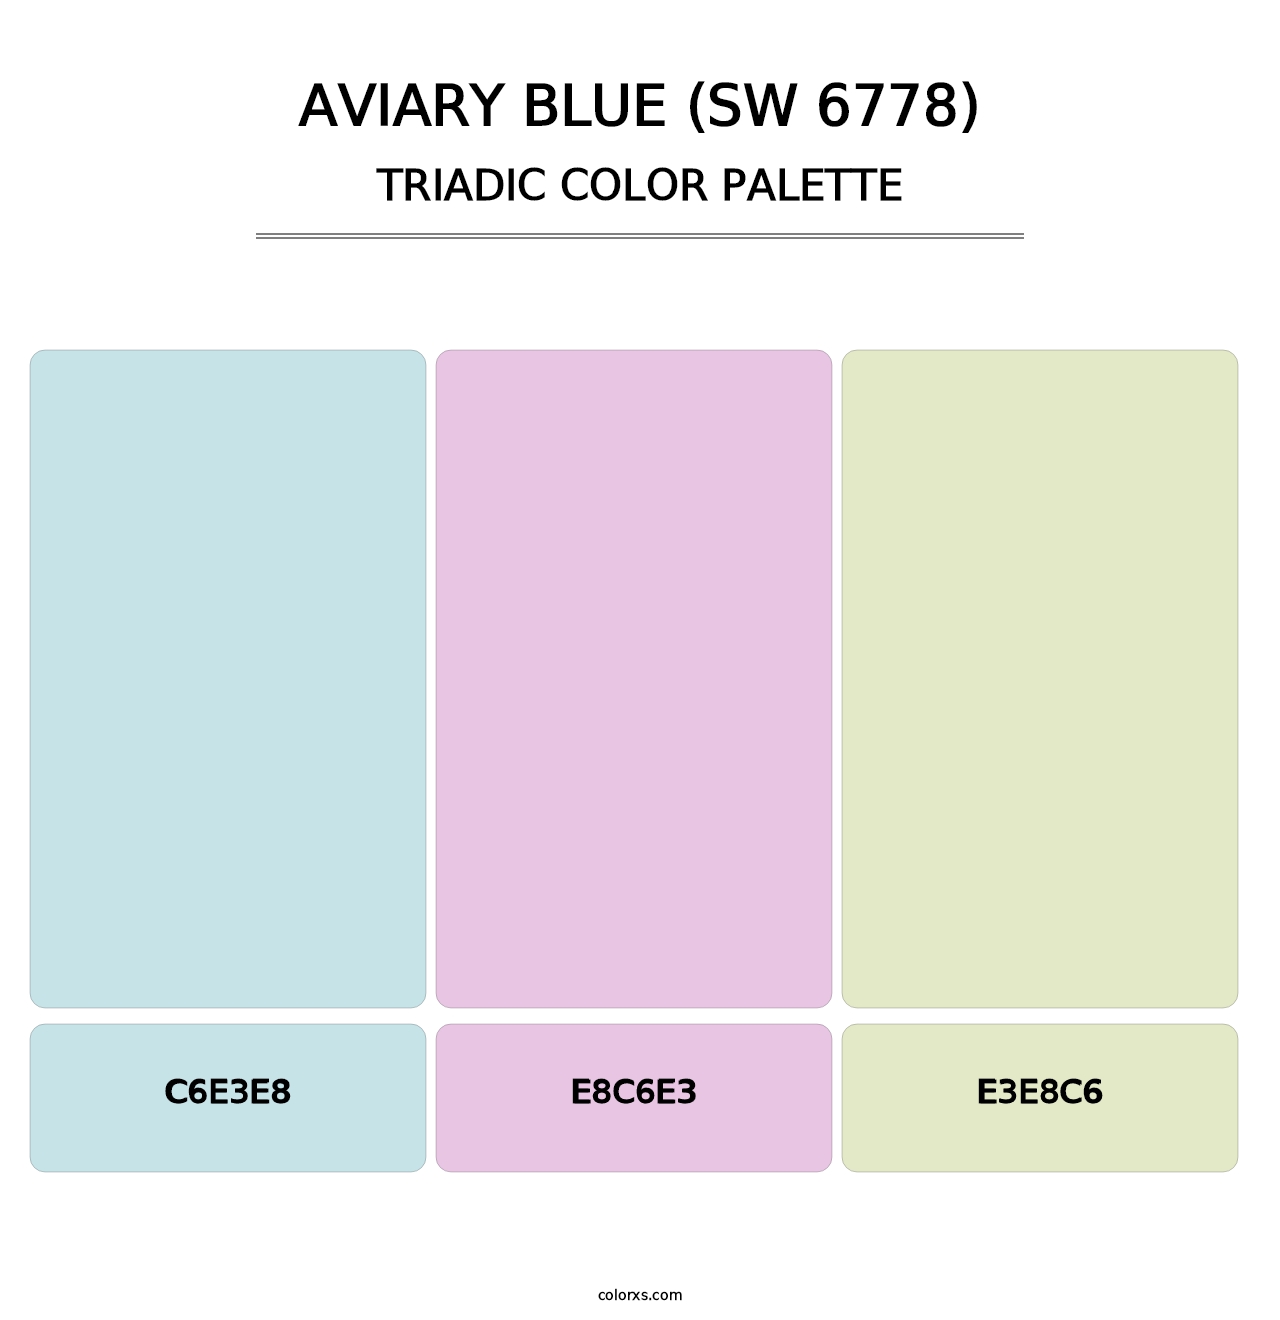 Aviary Blue (SW 6778) - Triadic Color Palette